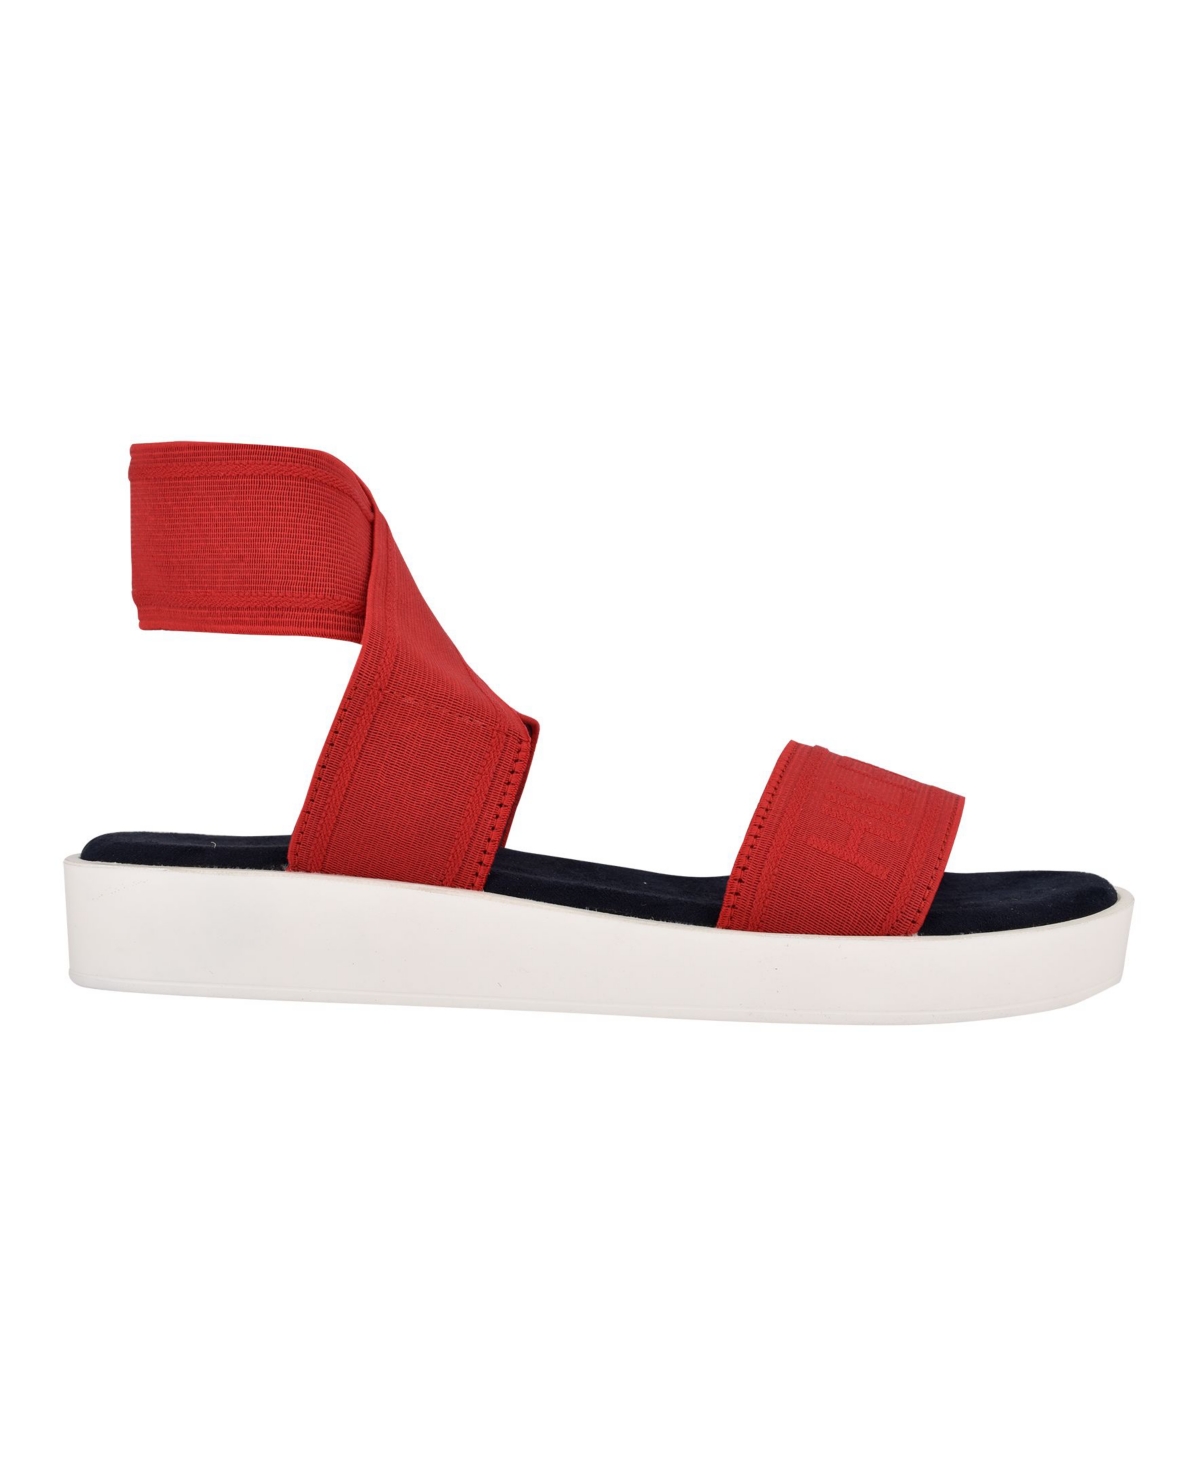 UPC 195182659440 product image for Tommy Hilfiger Women's Springi Stretch Ankle Wrap Sandals Women's Shoes | upcitemdb.com